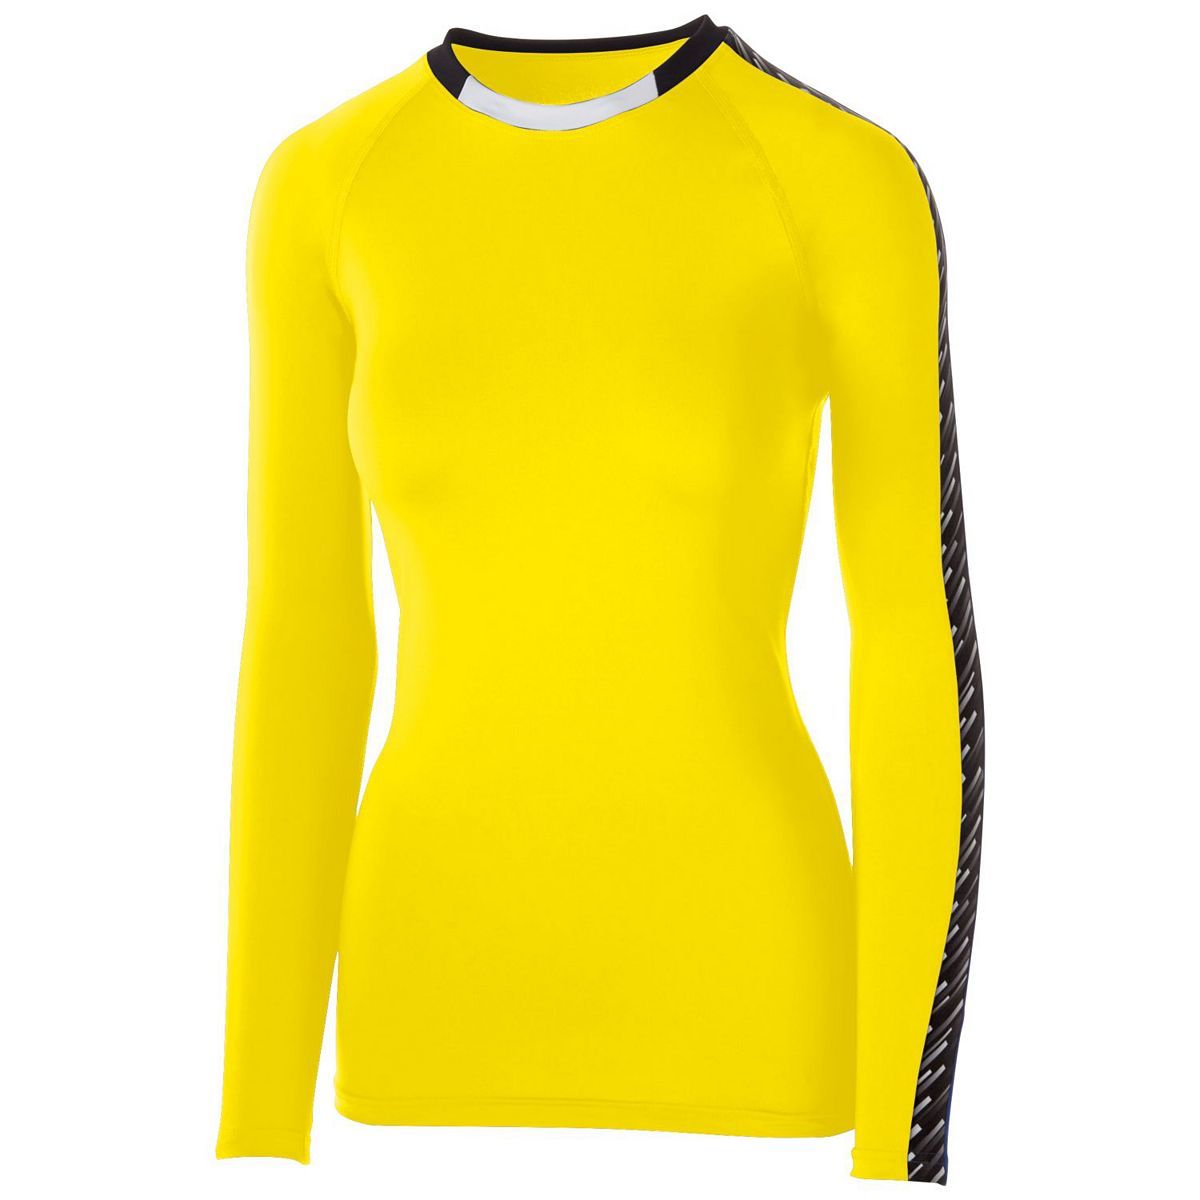 High 5 Girls Spectrum Long Sleeve Jersey in Power Yellow/Black/White  -Part of the Girls, High5-Products, Volleyball, Girls-Jersey, Shirts product lines at KanaleyCreations.com